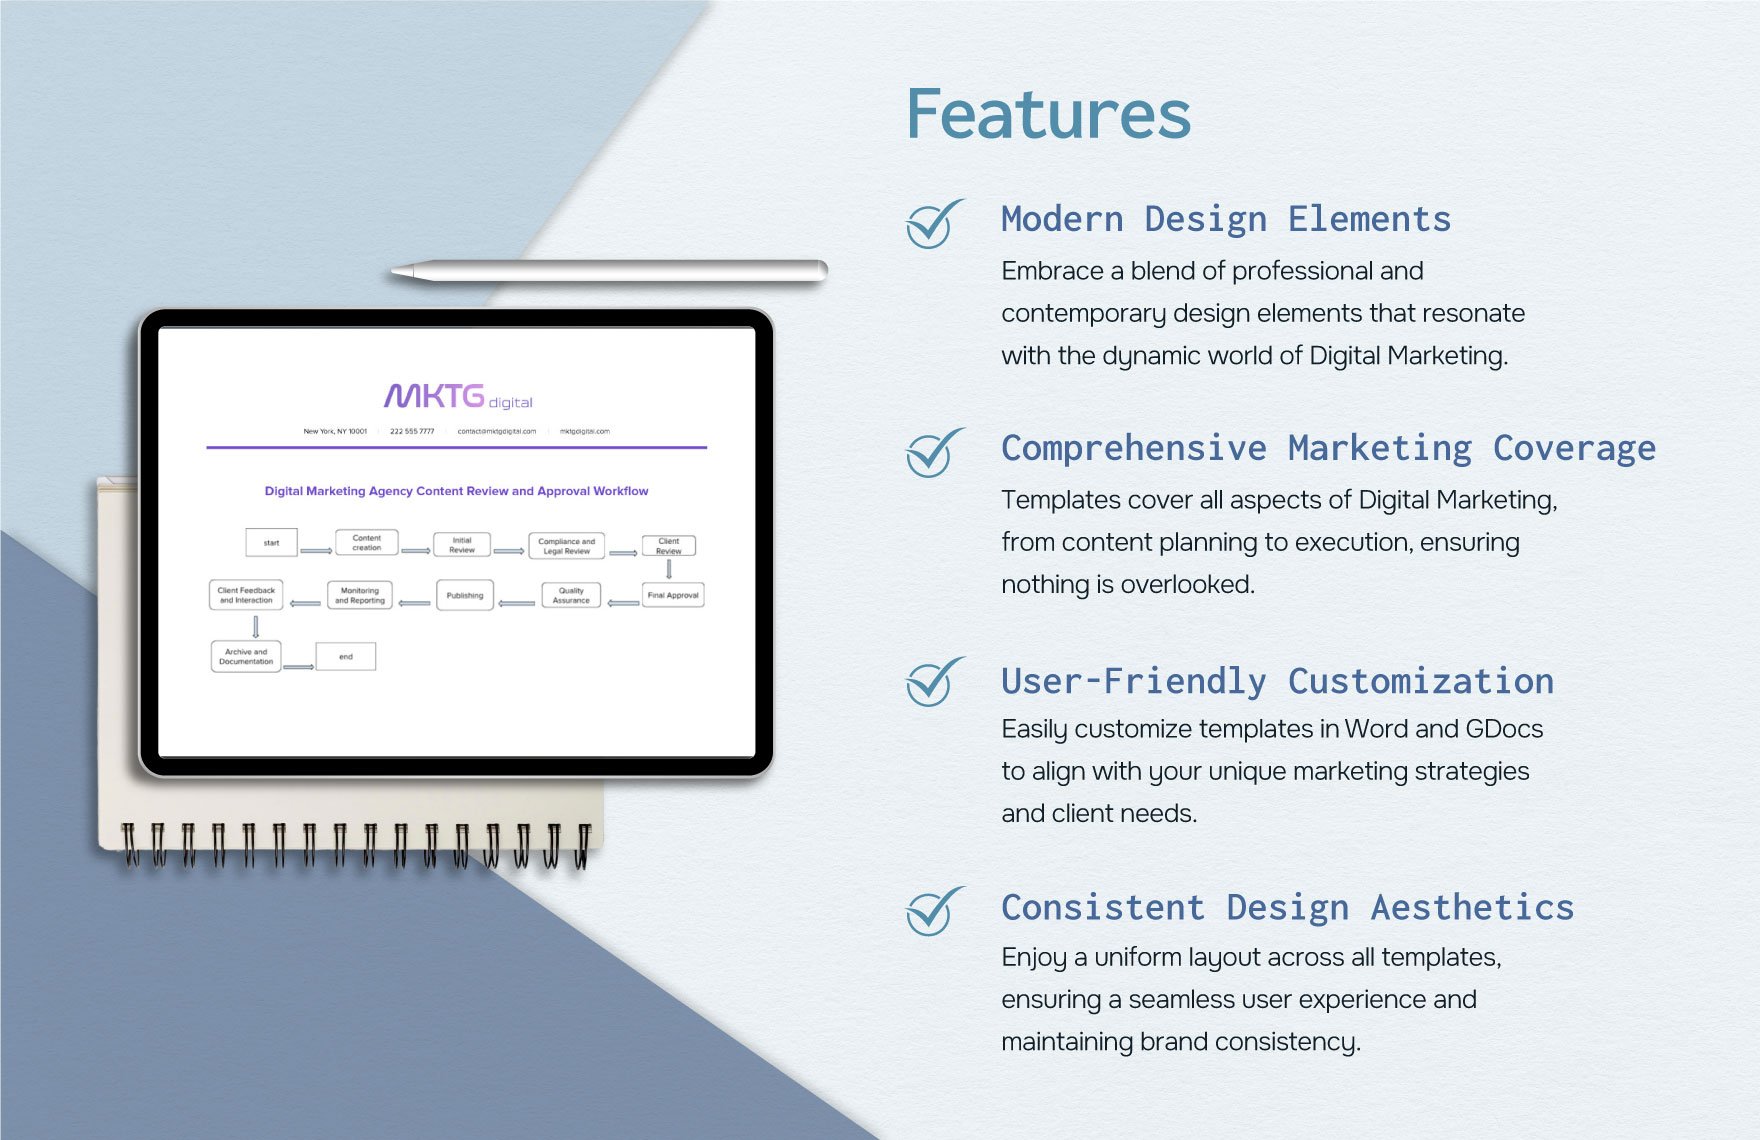 Digital Marketing Agency Content Review and Approval Workflow Template